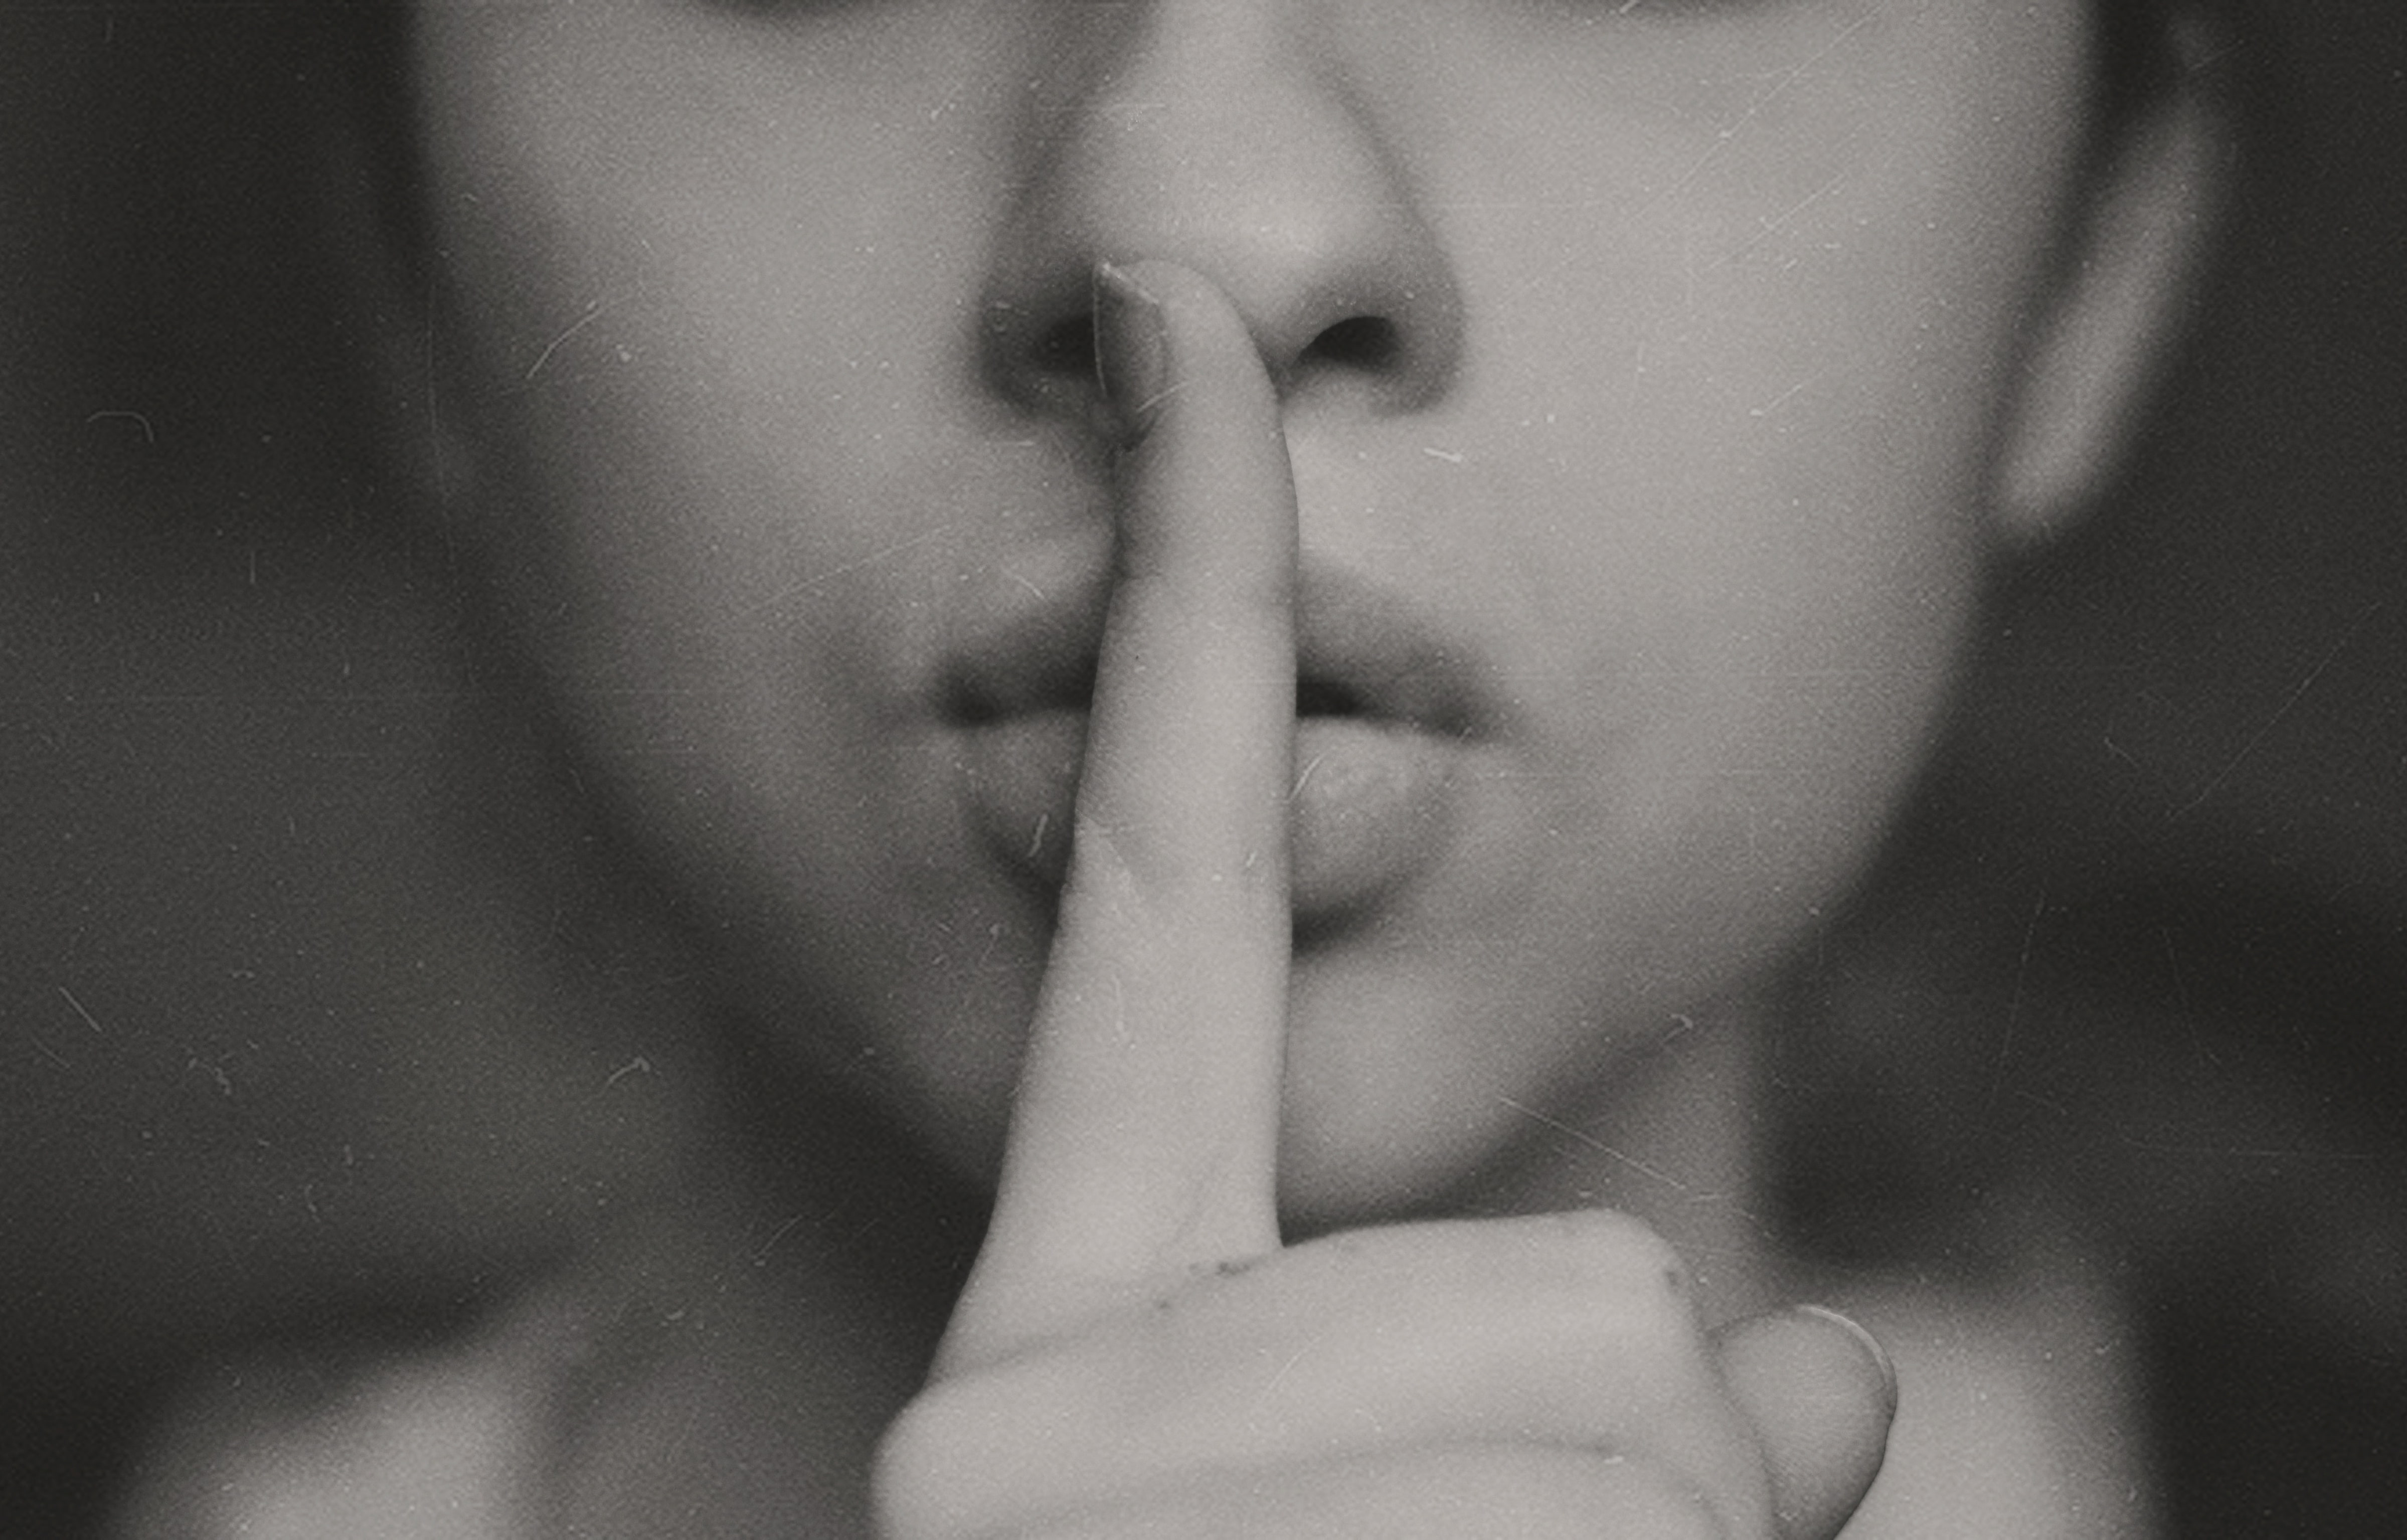 A women holding up her finger in front pursed lips.